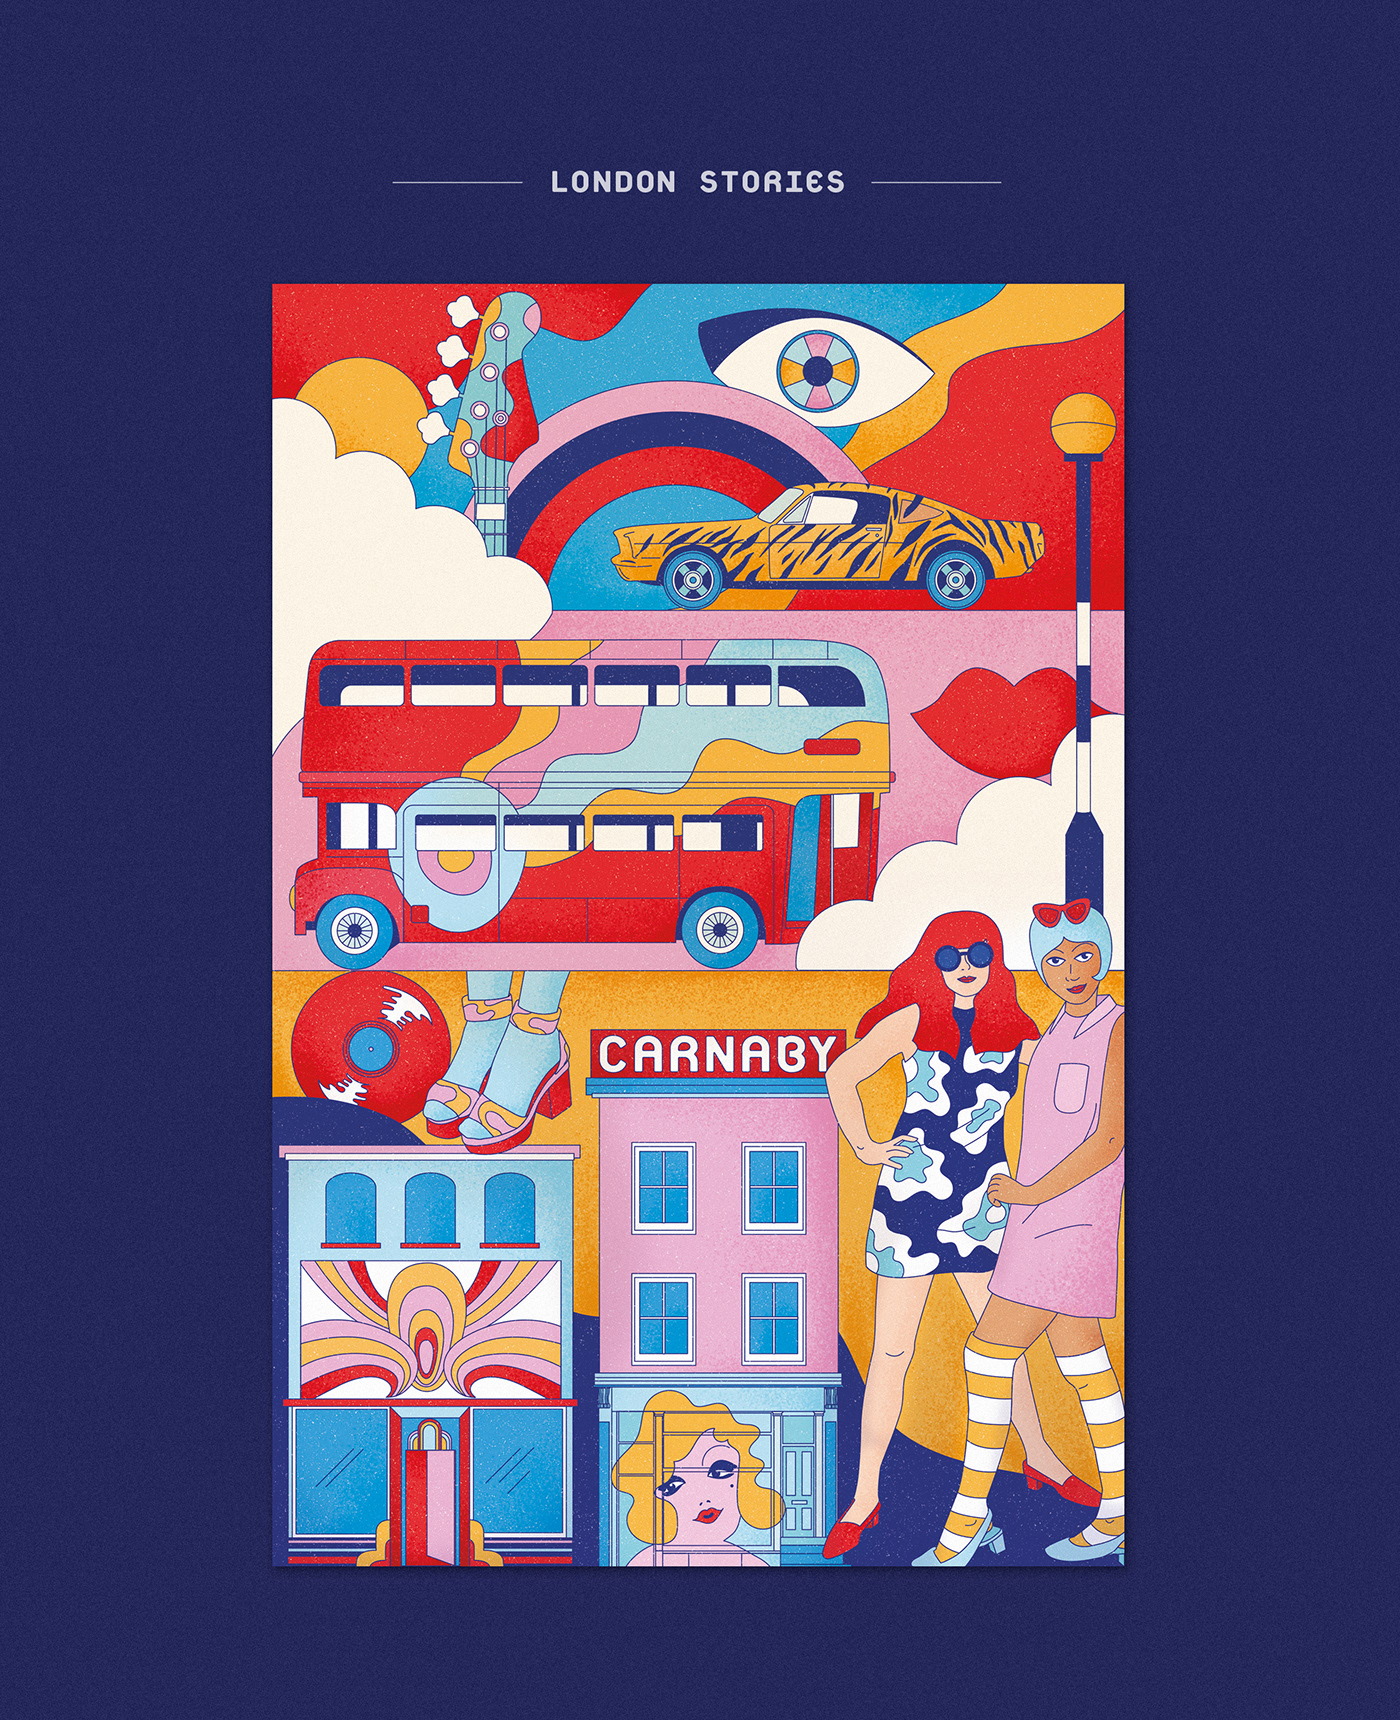 London aoi 70s carnabyst Fashion  women bus poster Icon patterndesign